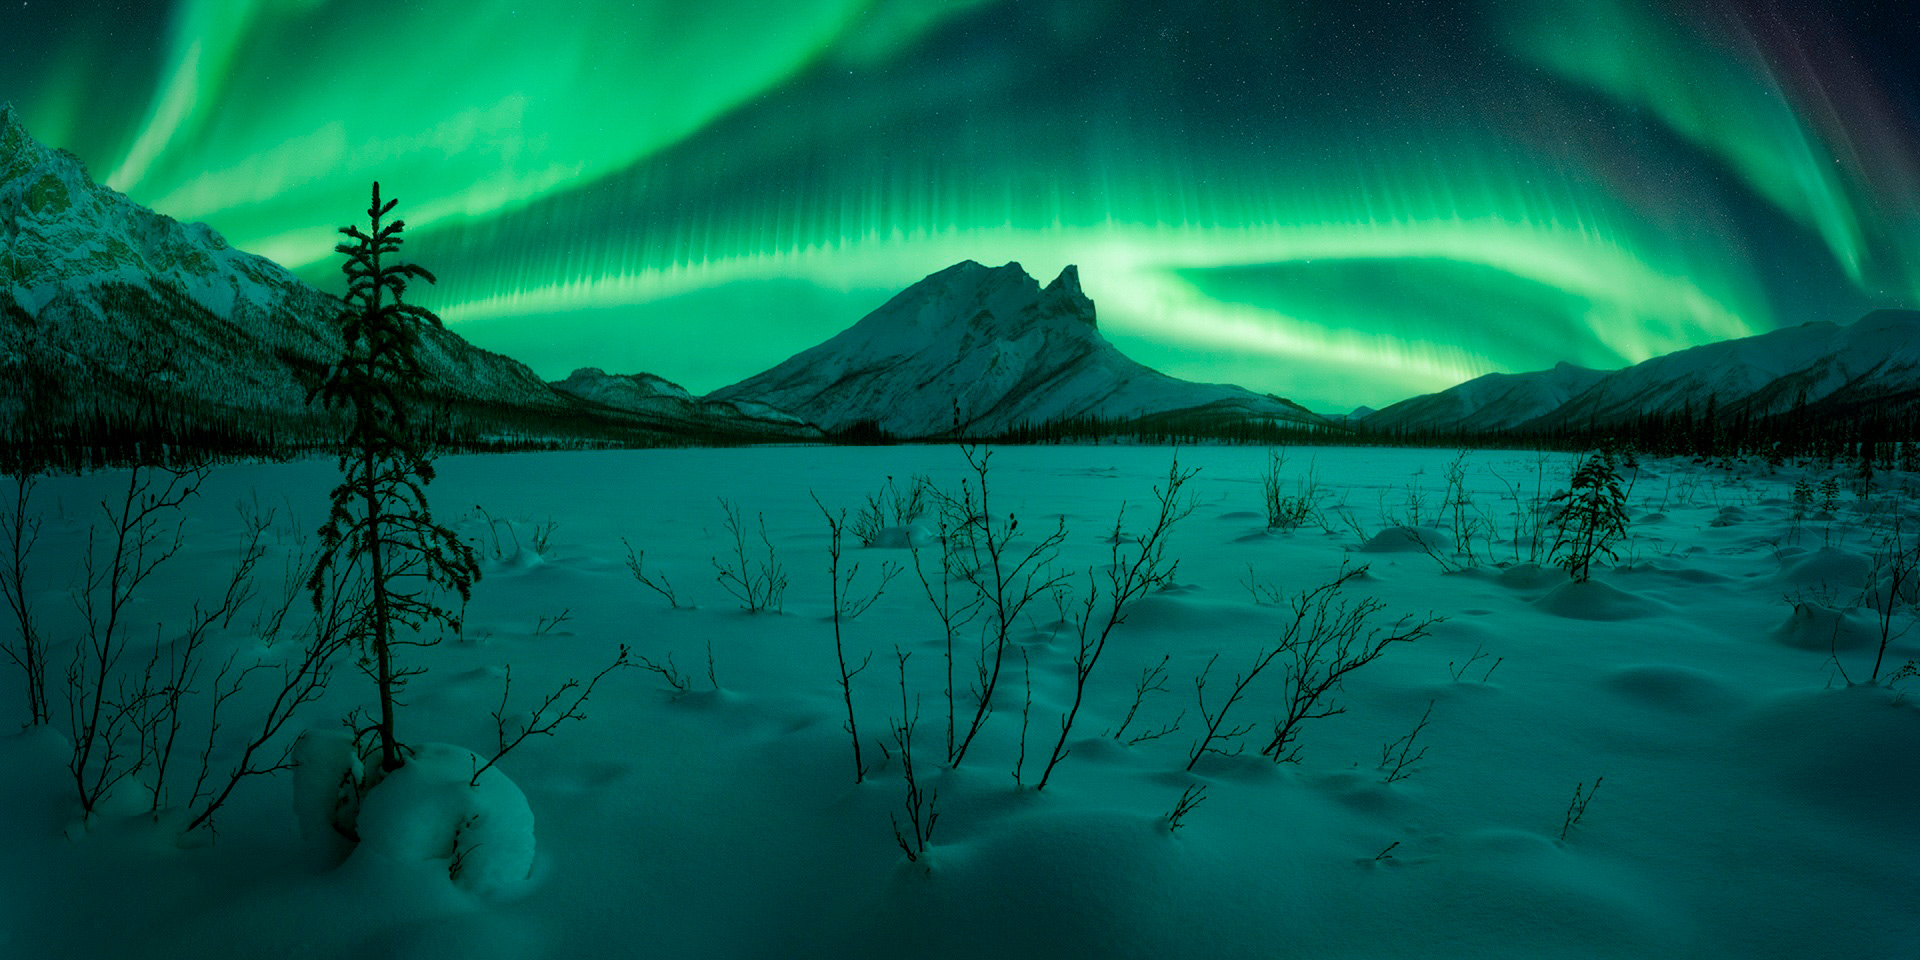 Snow-caped mountain lit up by the northern lights during a winter night